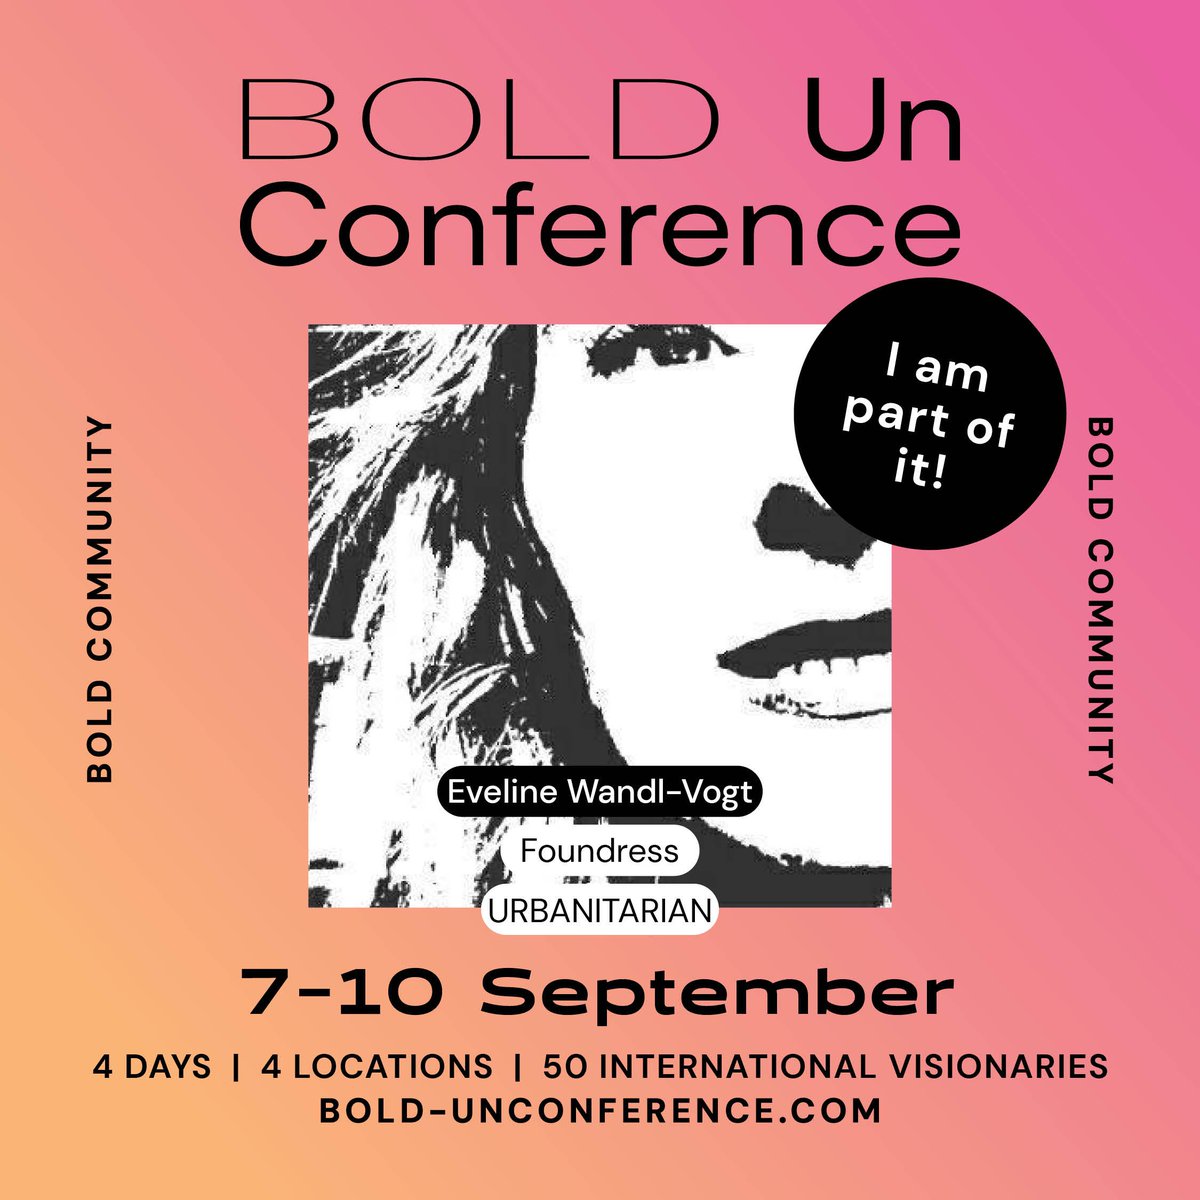 thrilled 2 be part of the upcoming BOLD unconference in AT! looking forward 2 networking + learning & growing w/ great minds from around the world. see u!
#BOLDUnconference #Matchmake #Collaborate #BOLDCommunity @urbanistyka @Justhood_net #k4h+ @ArsElectronica #explorations4u